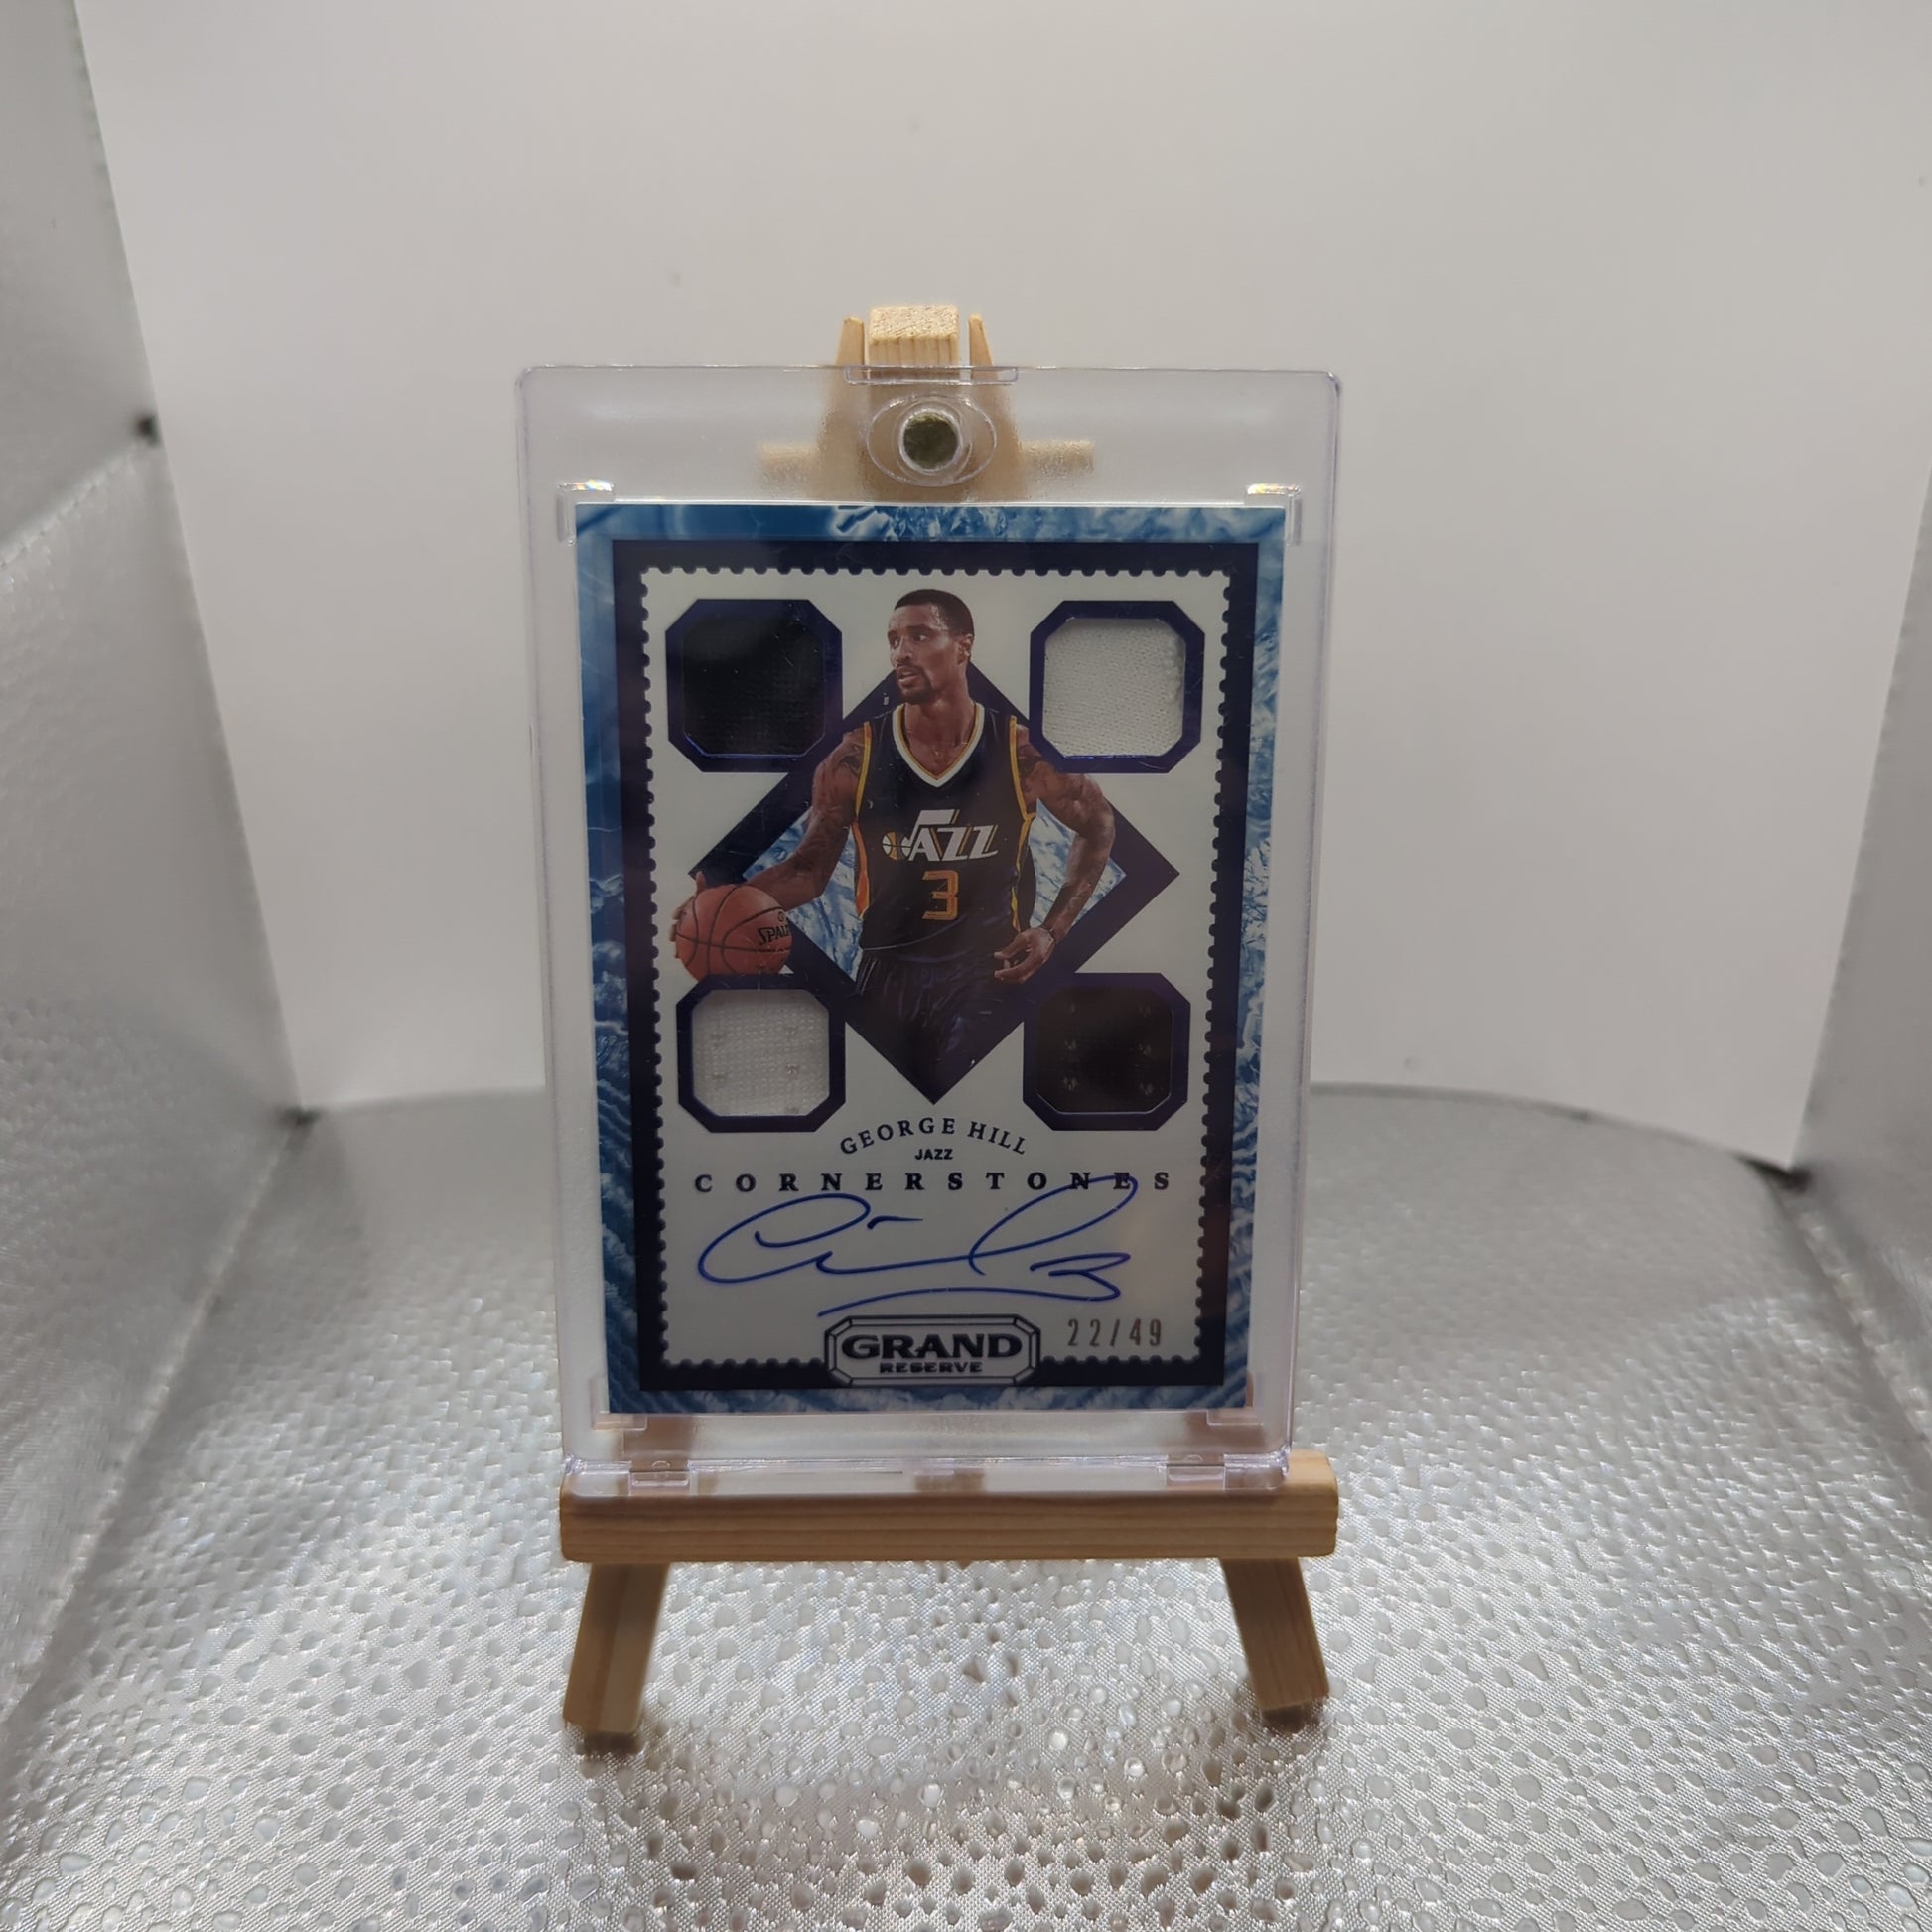 2016-2017 Panini Grand Reserve George Hill Quad Patch 4 Patch Auto /49 FRENLY BRICKS - Open 7 Days